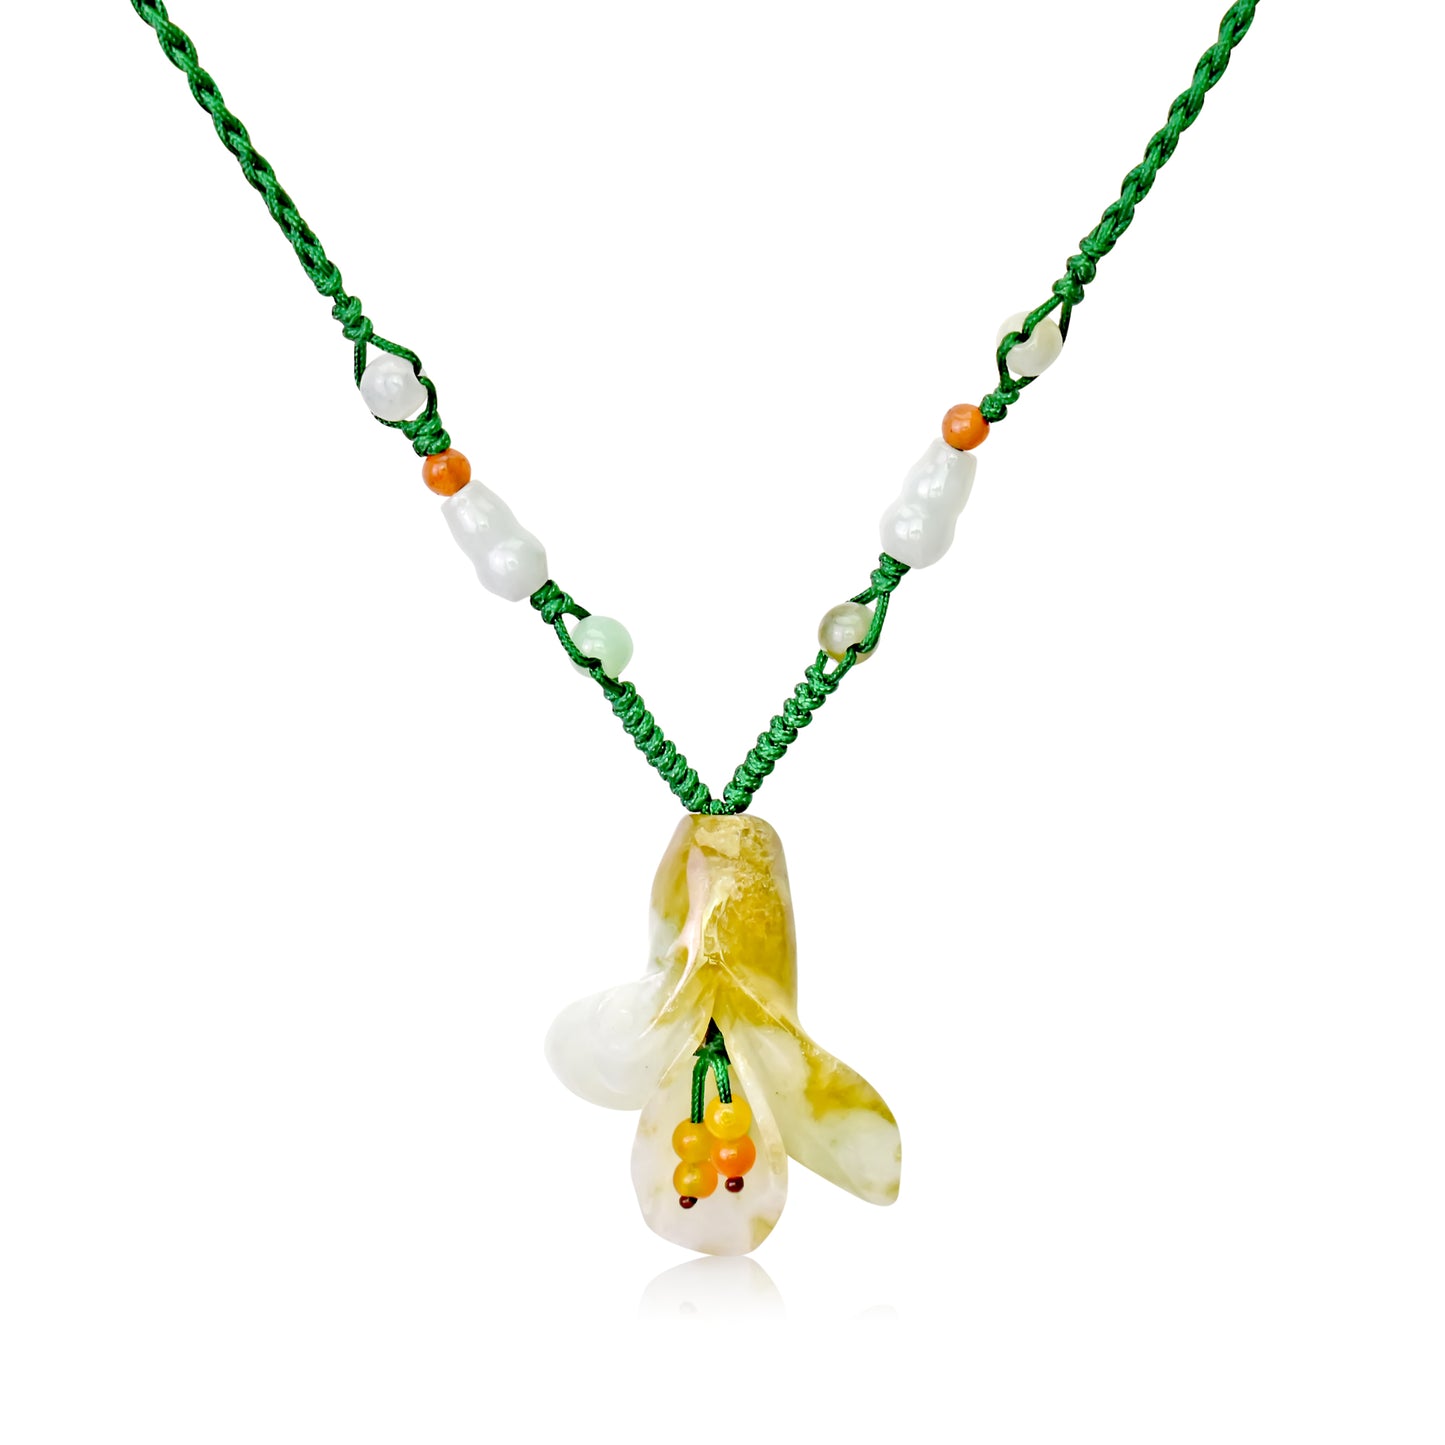 Add Feminine Charm with "I am Yours" Calla Lily Necklace made with Green Cord